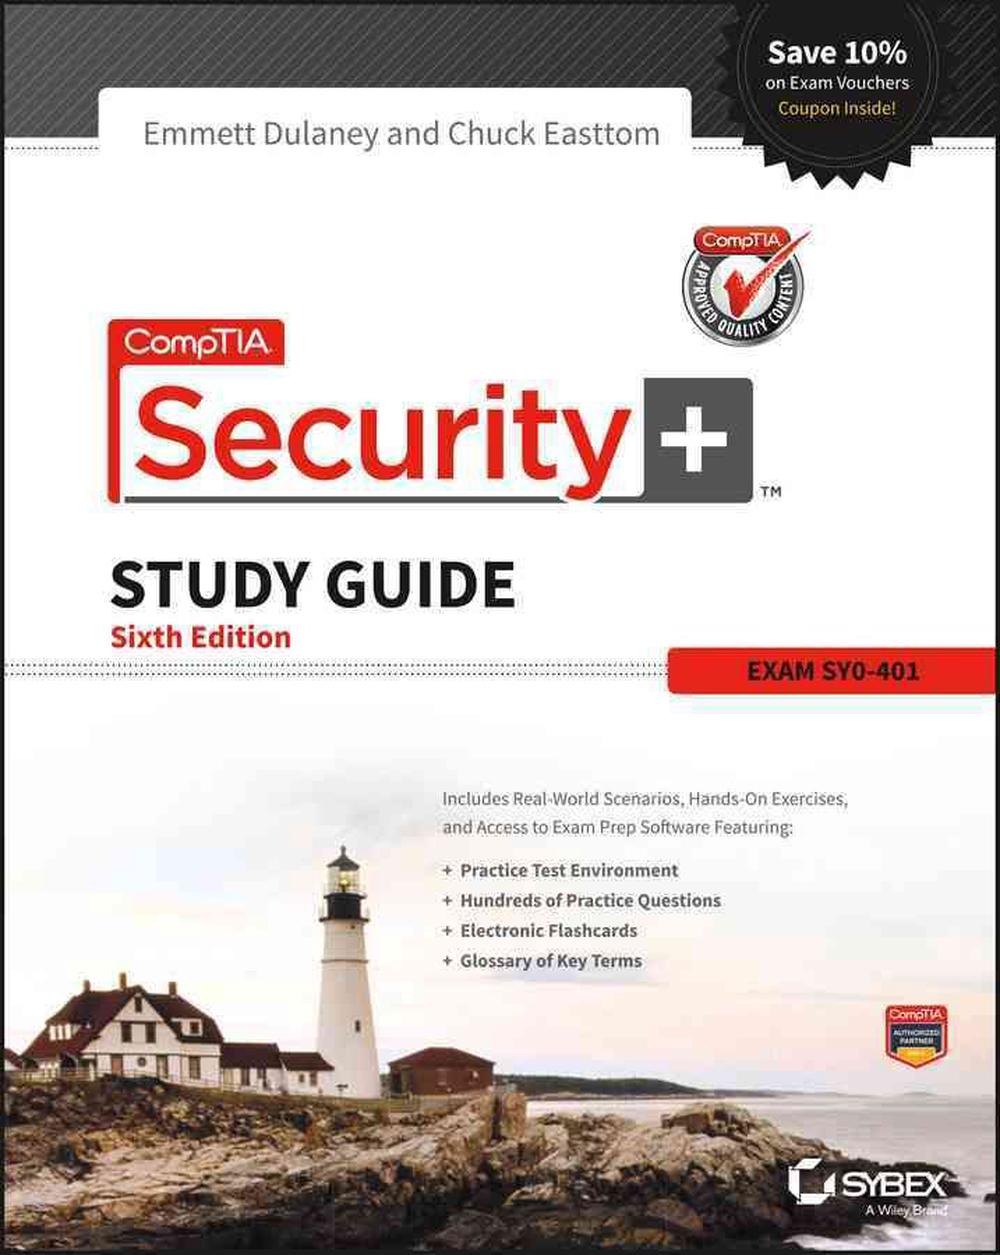 Comptia Security+ Study Guide Sy0401 by Emmett Dulaney (English